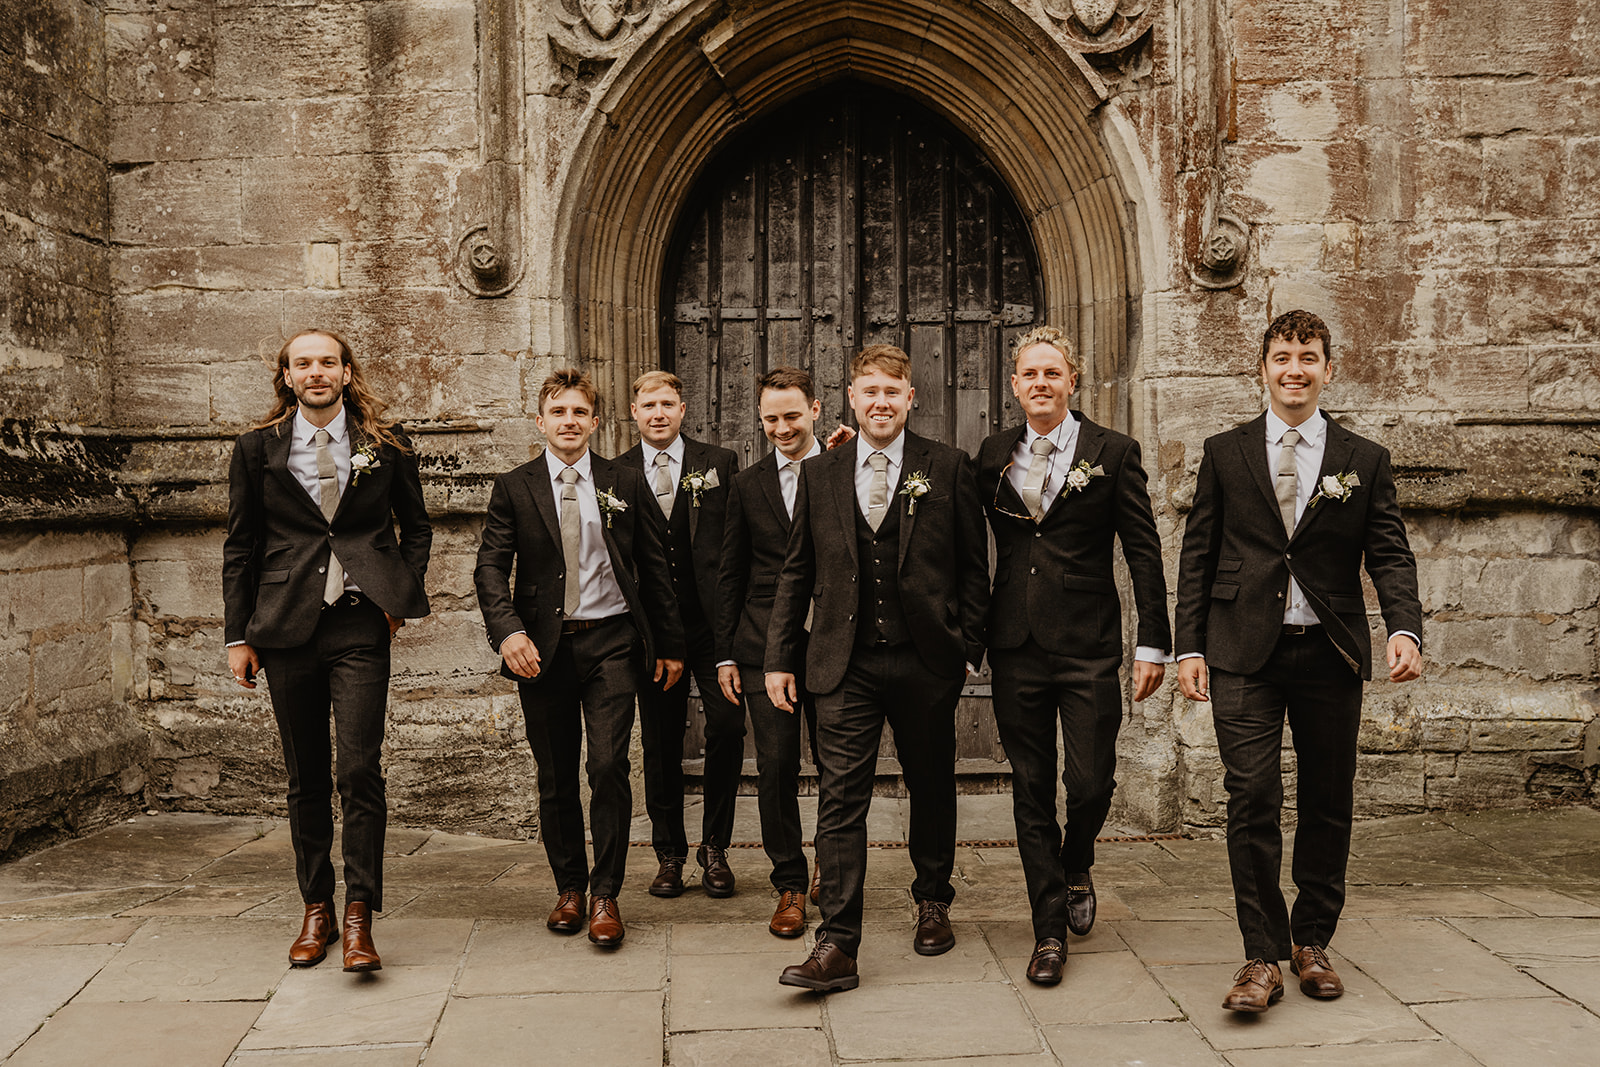 A groom and his groomsman at a Great Tythe Barn Wedding, Cotswolds. By Olive Joy Photography.